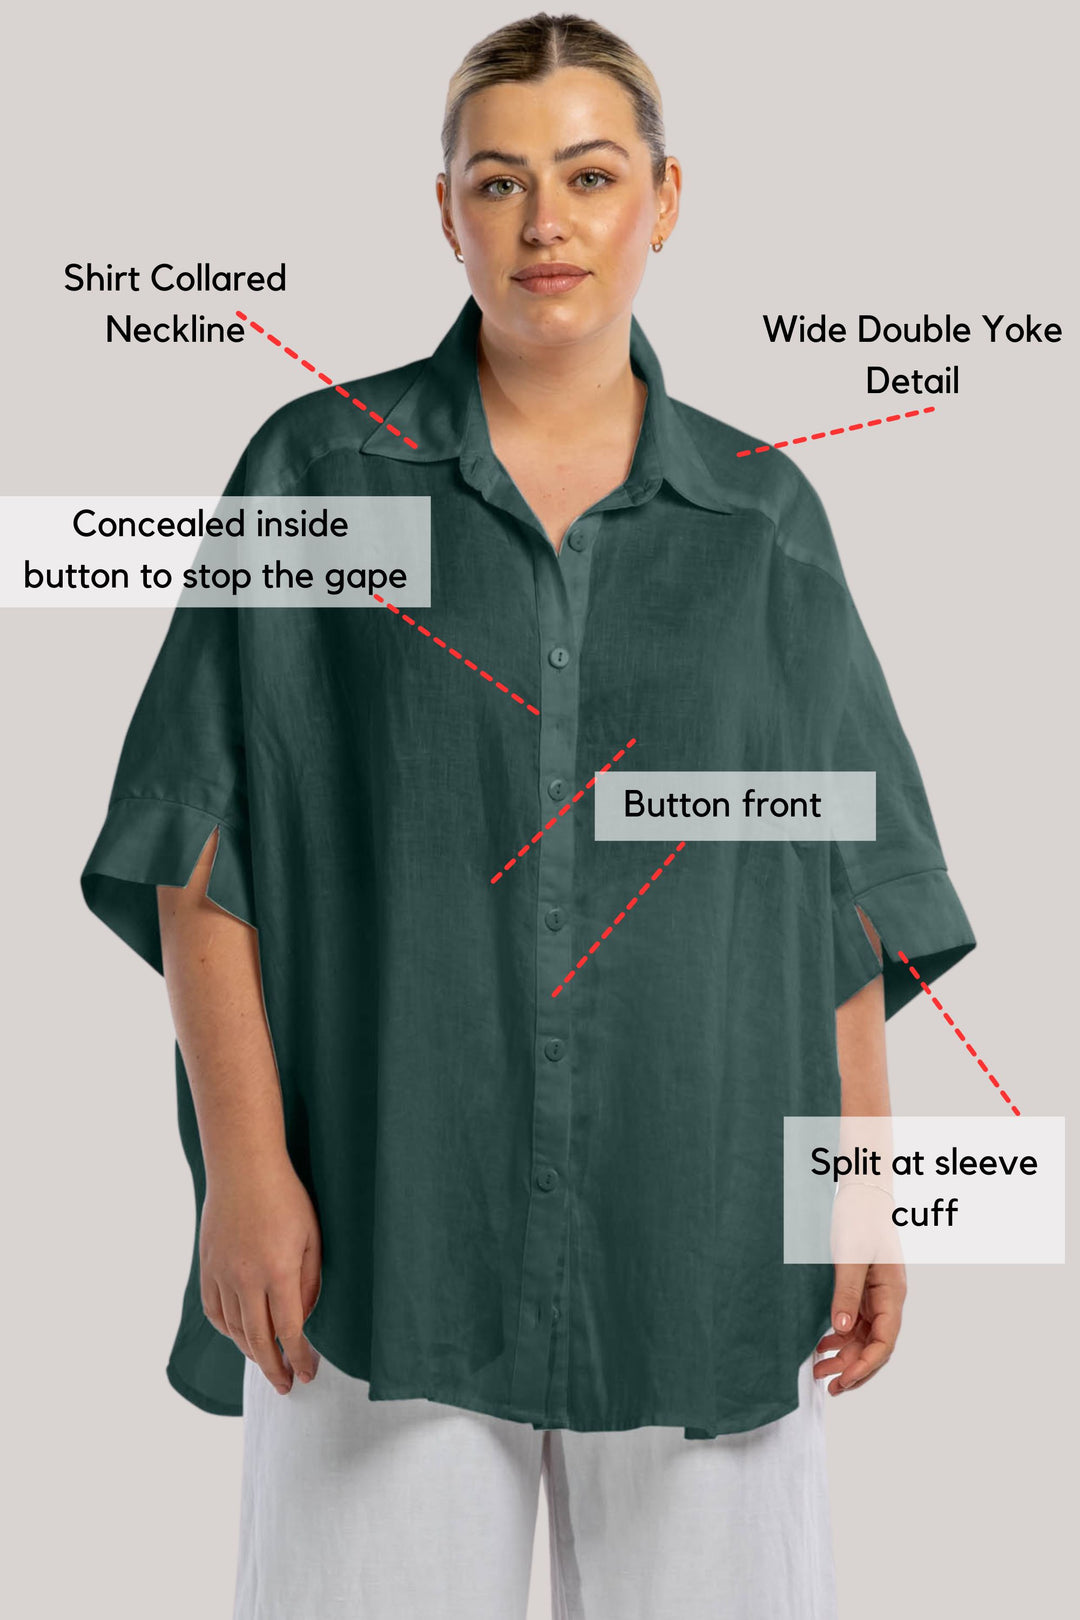 Come Together Oversized Shirt - Teal  - STOCK AVAILABLE - SIZE XS (12/14), S (14/16)